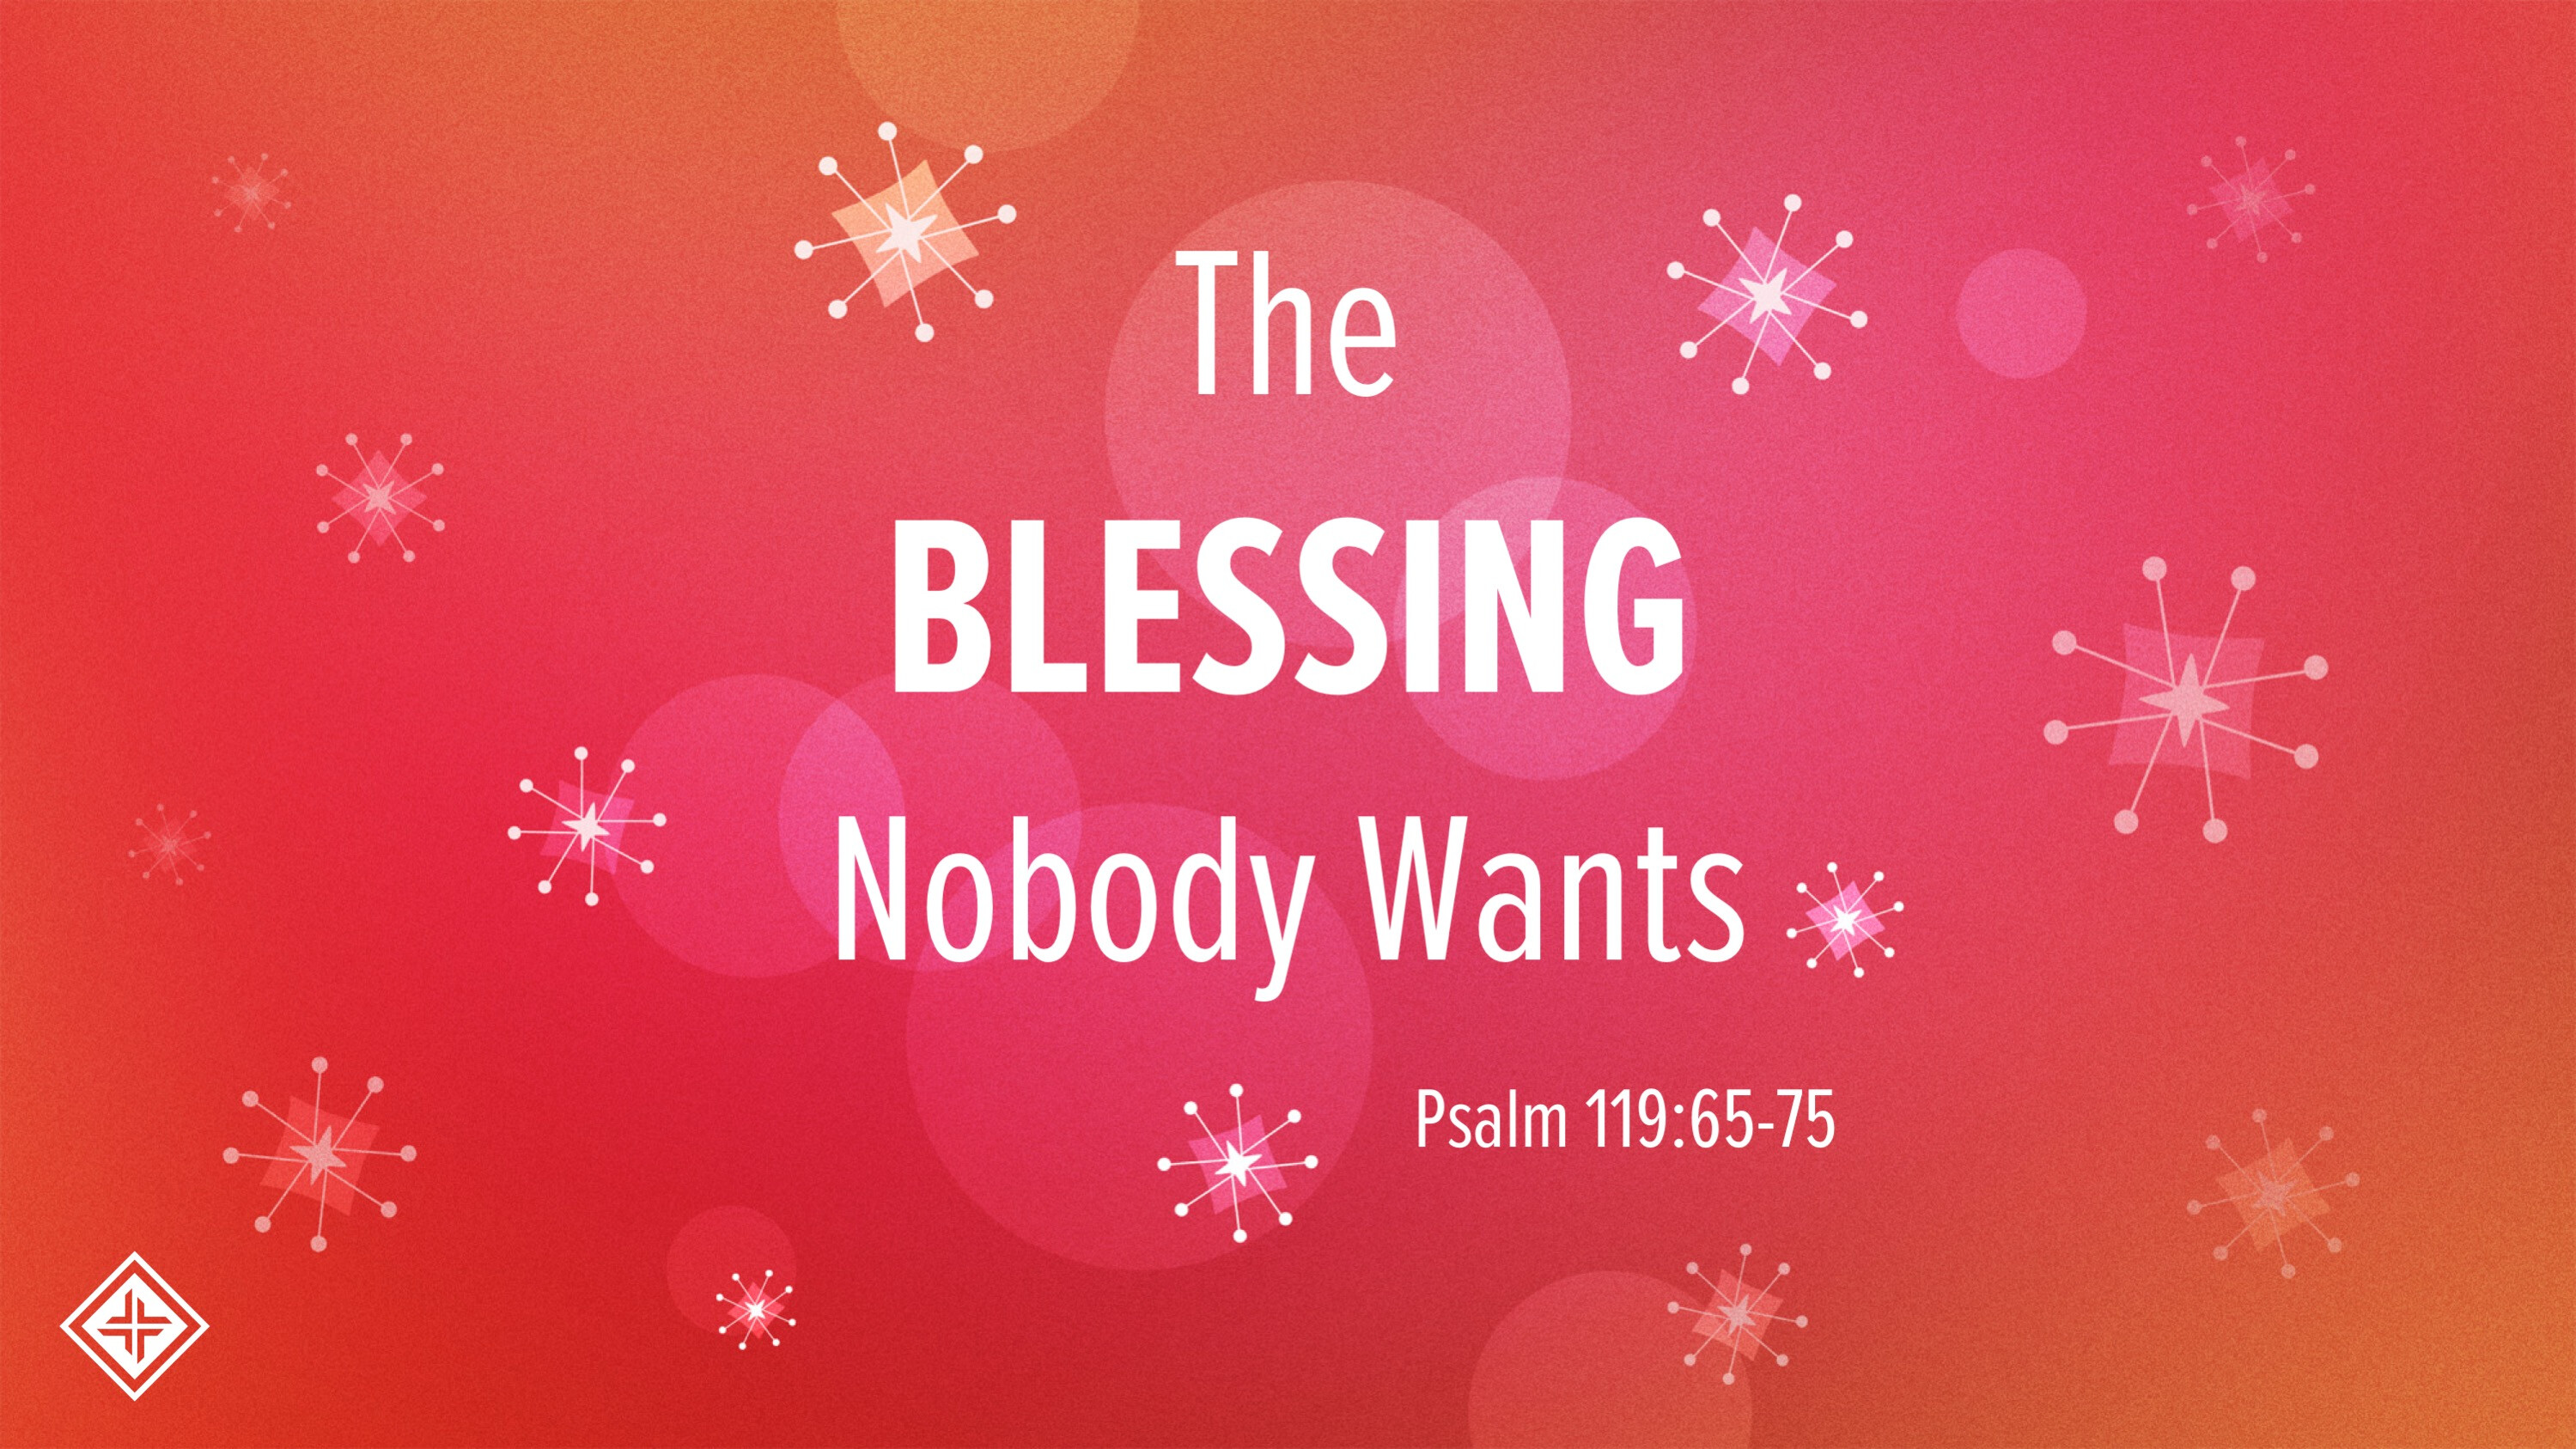 The Blessing Nobody Wants